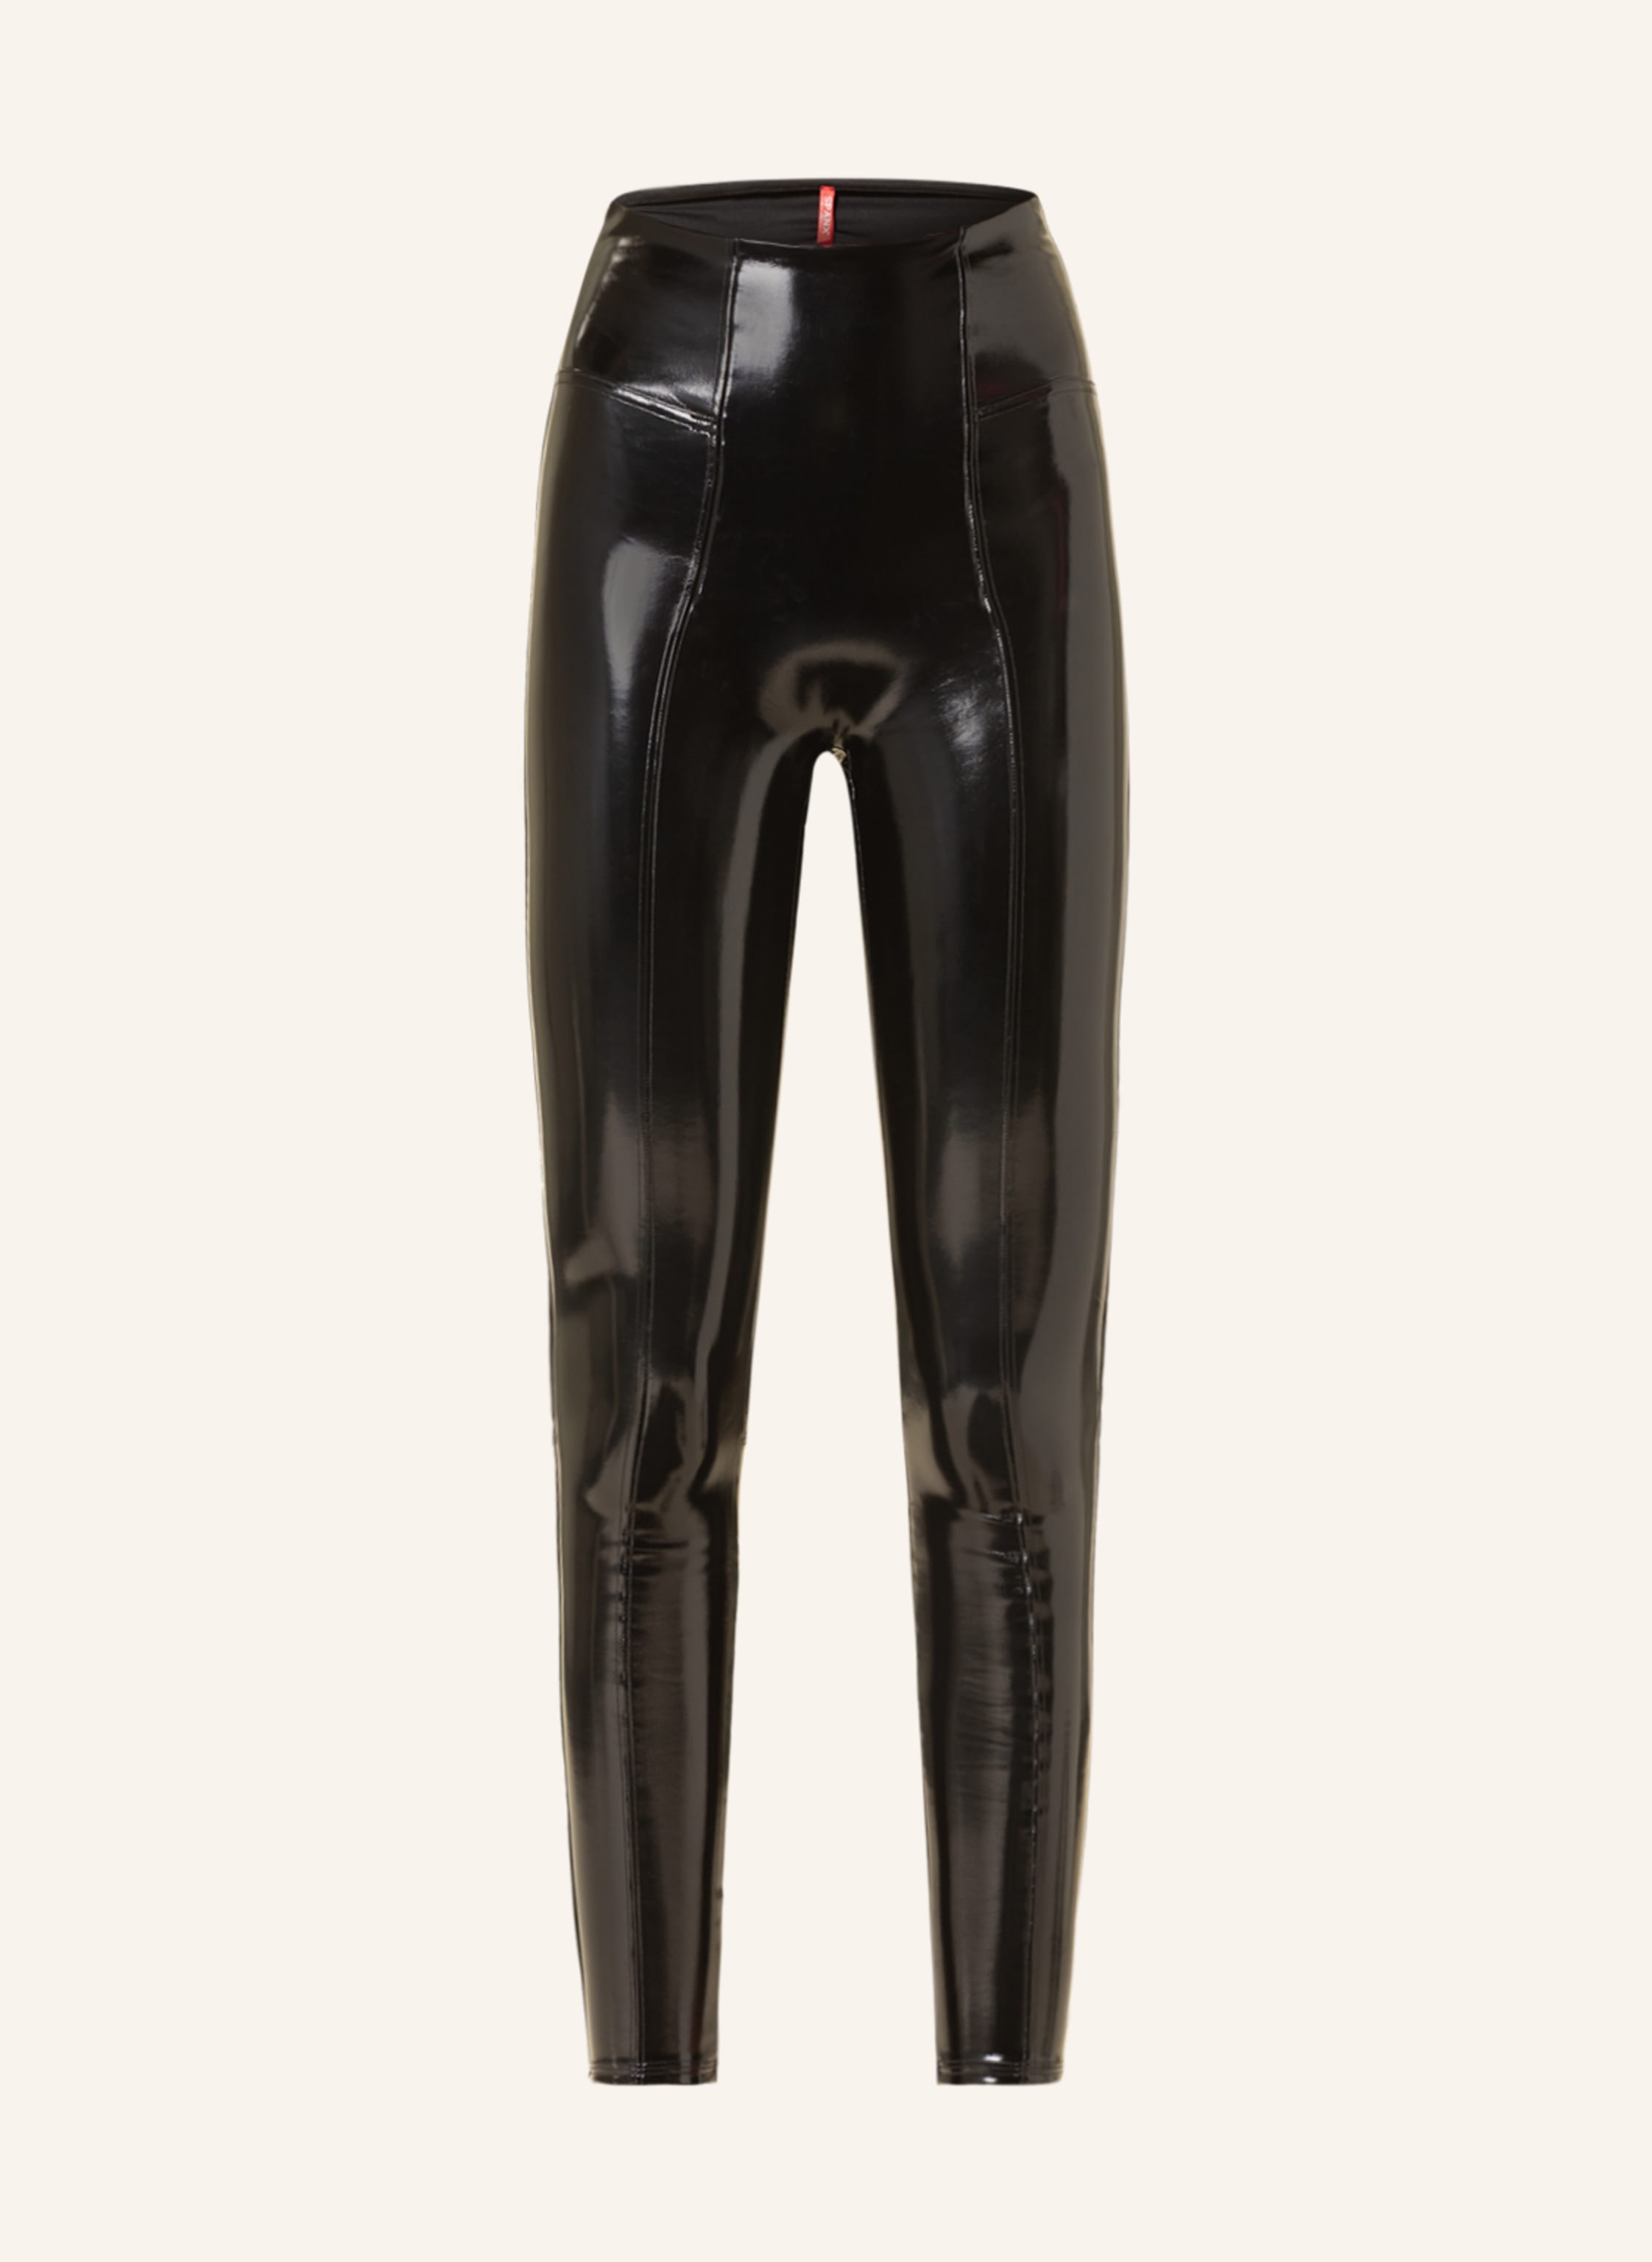 Faux Patent Leather Leggings Patent Leather Leggings, Black Leather ...